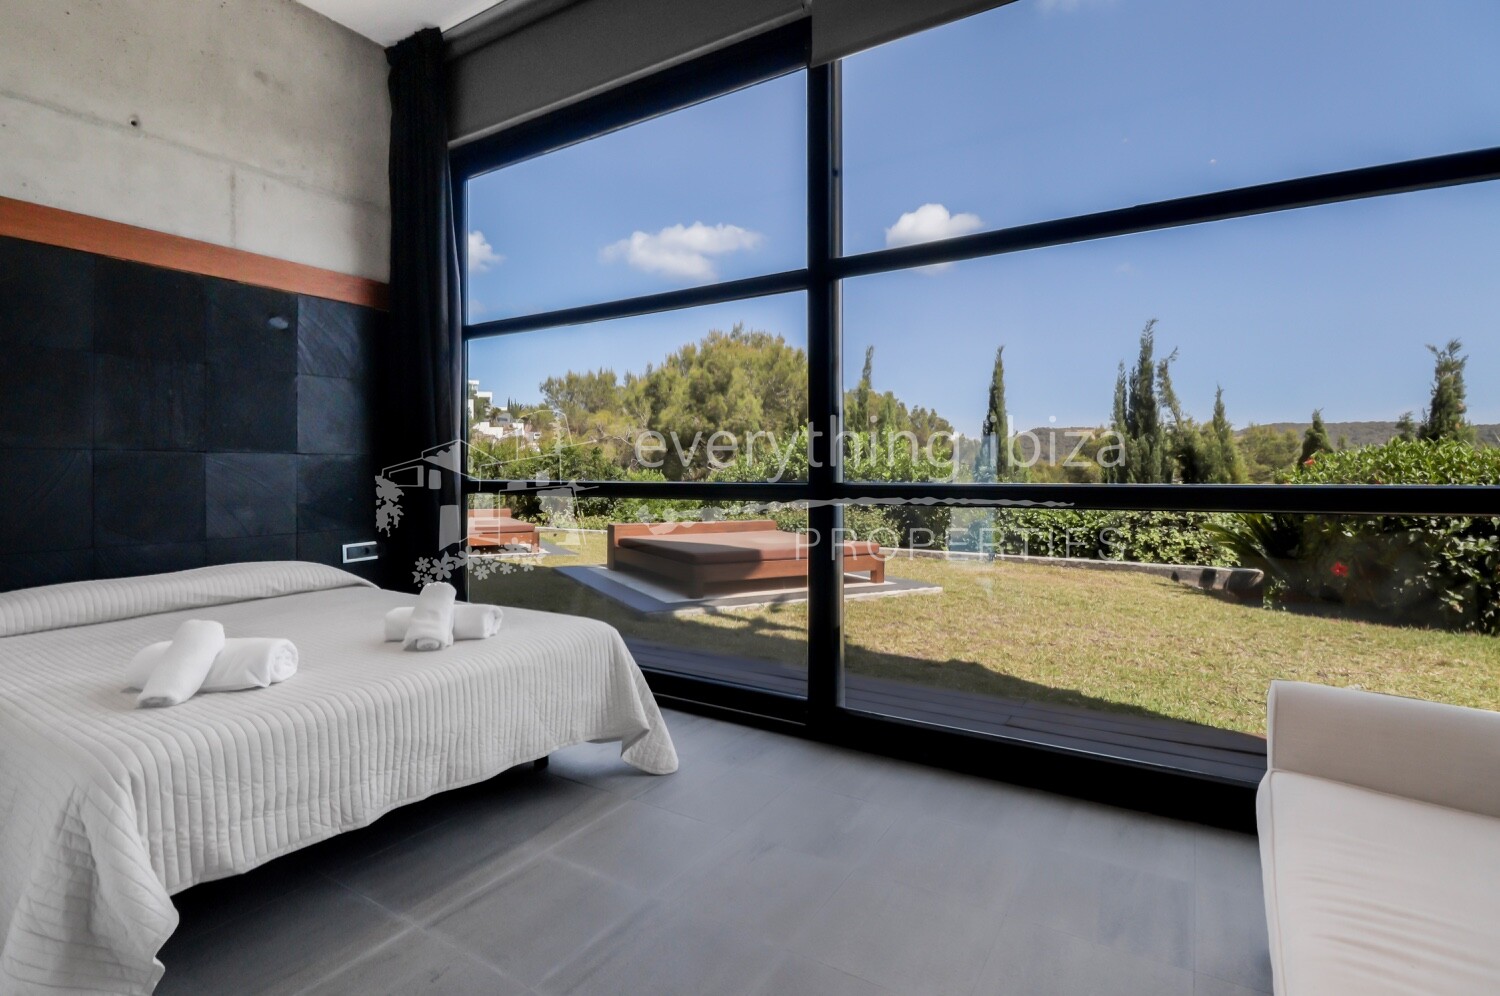 Designer Contemporary Villa with Super Views & Tourist License, ref. 1608, for sale in Ibiza by everything ibiza Properties